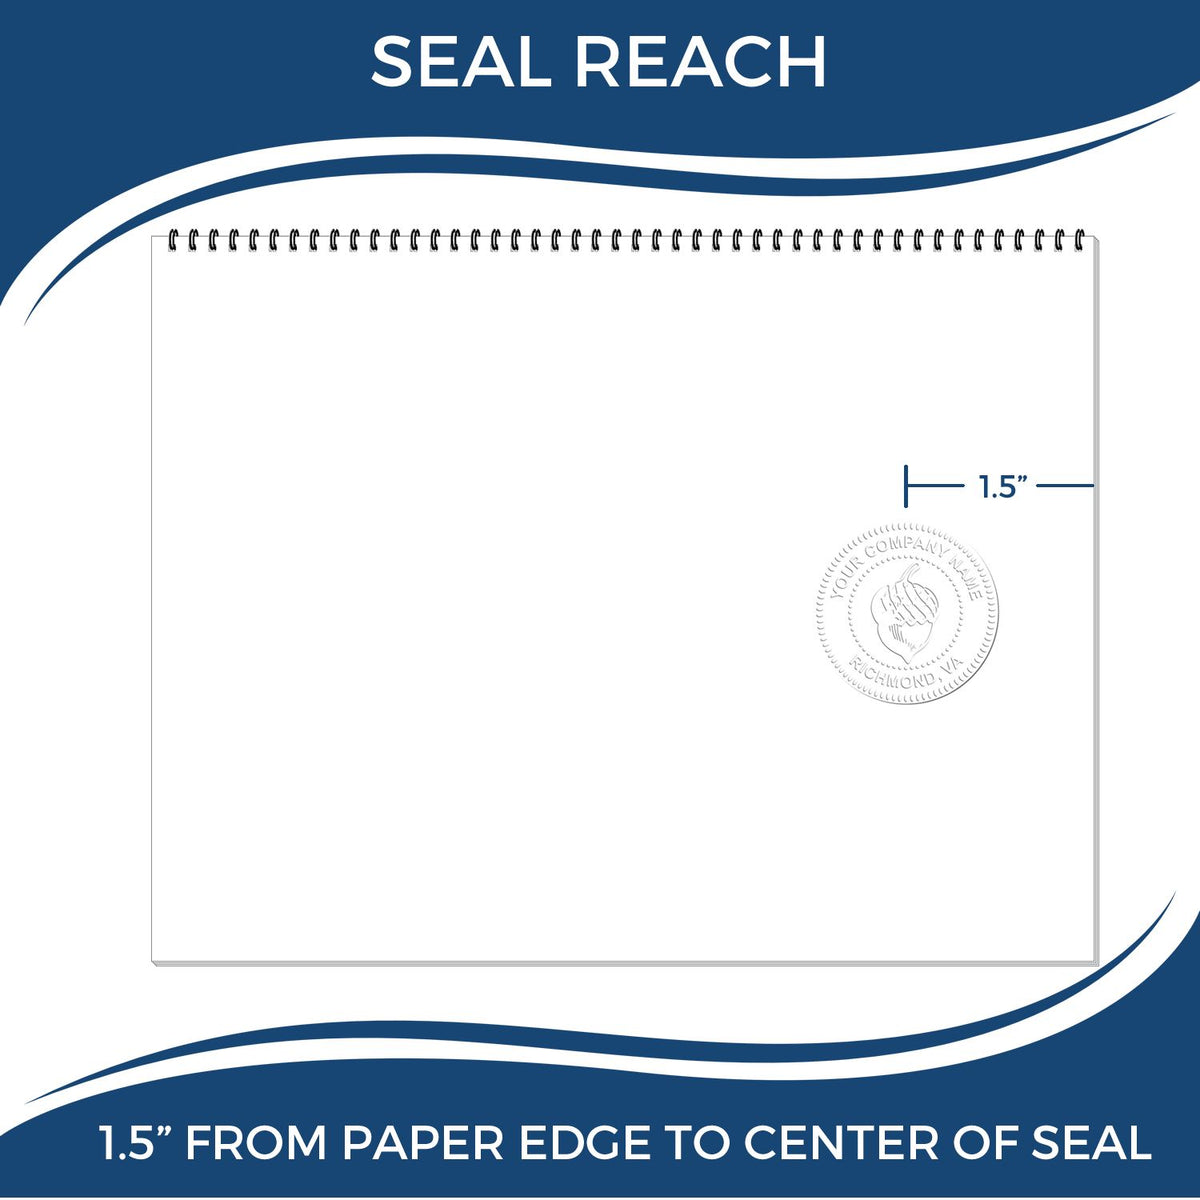 An infographic showing the seal reach which is represented by a ruler and a miniature seal image of the Hybrid Illinois Architect Seal